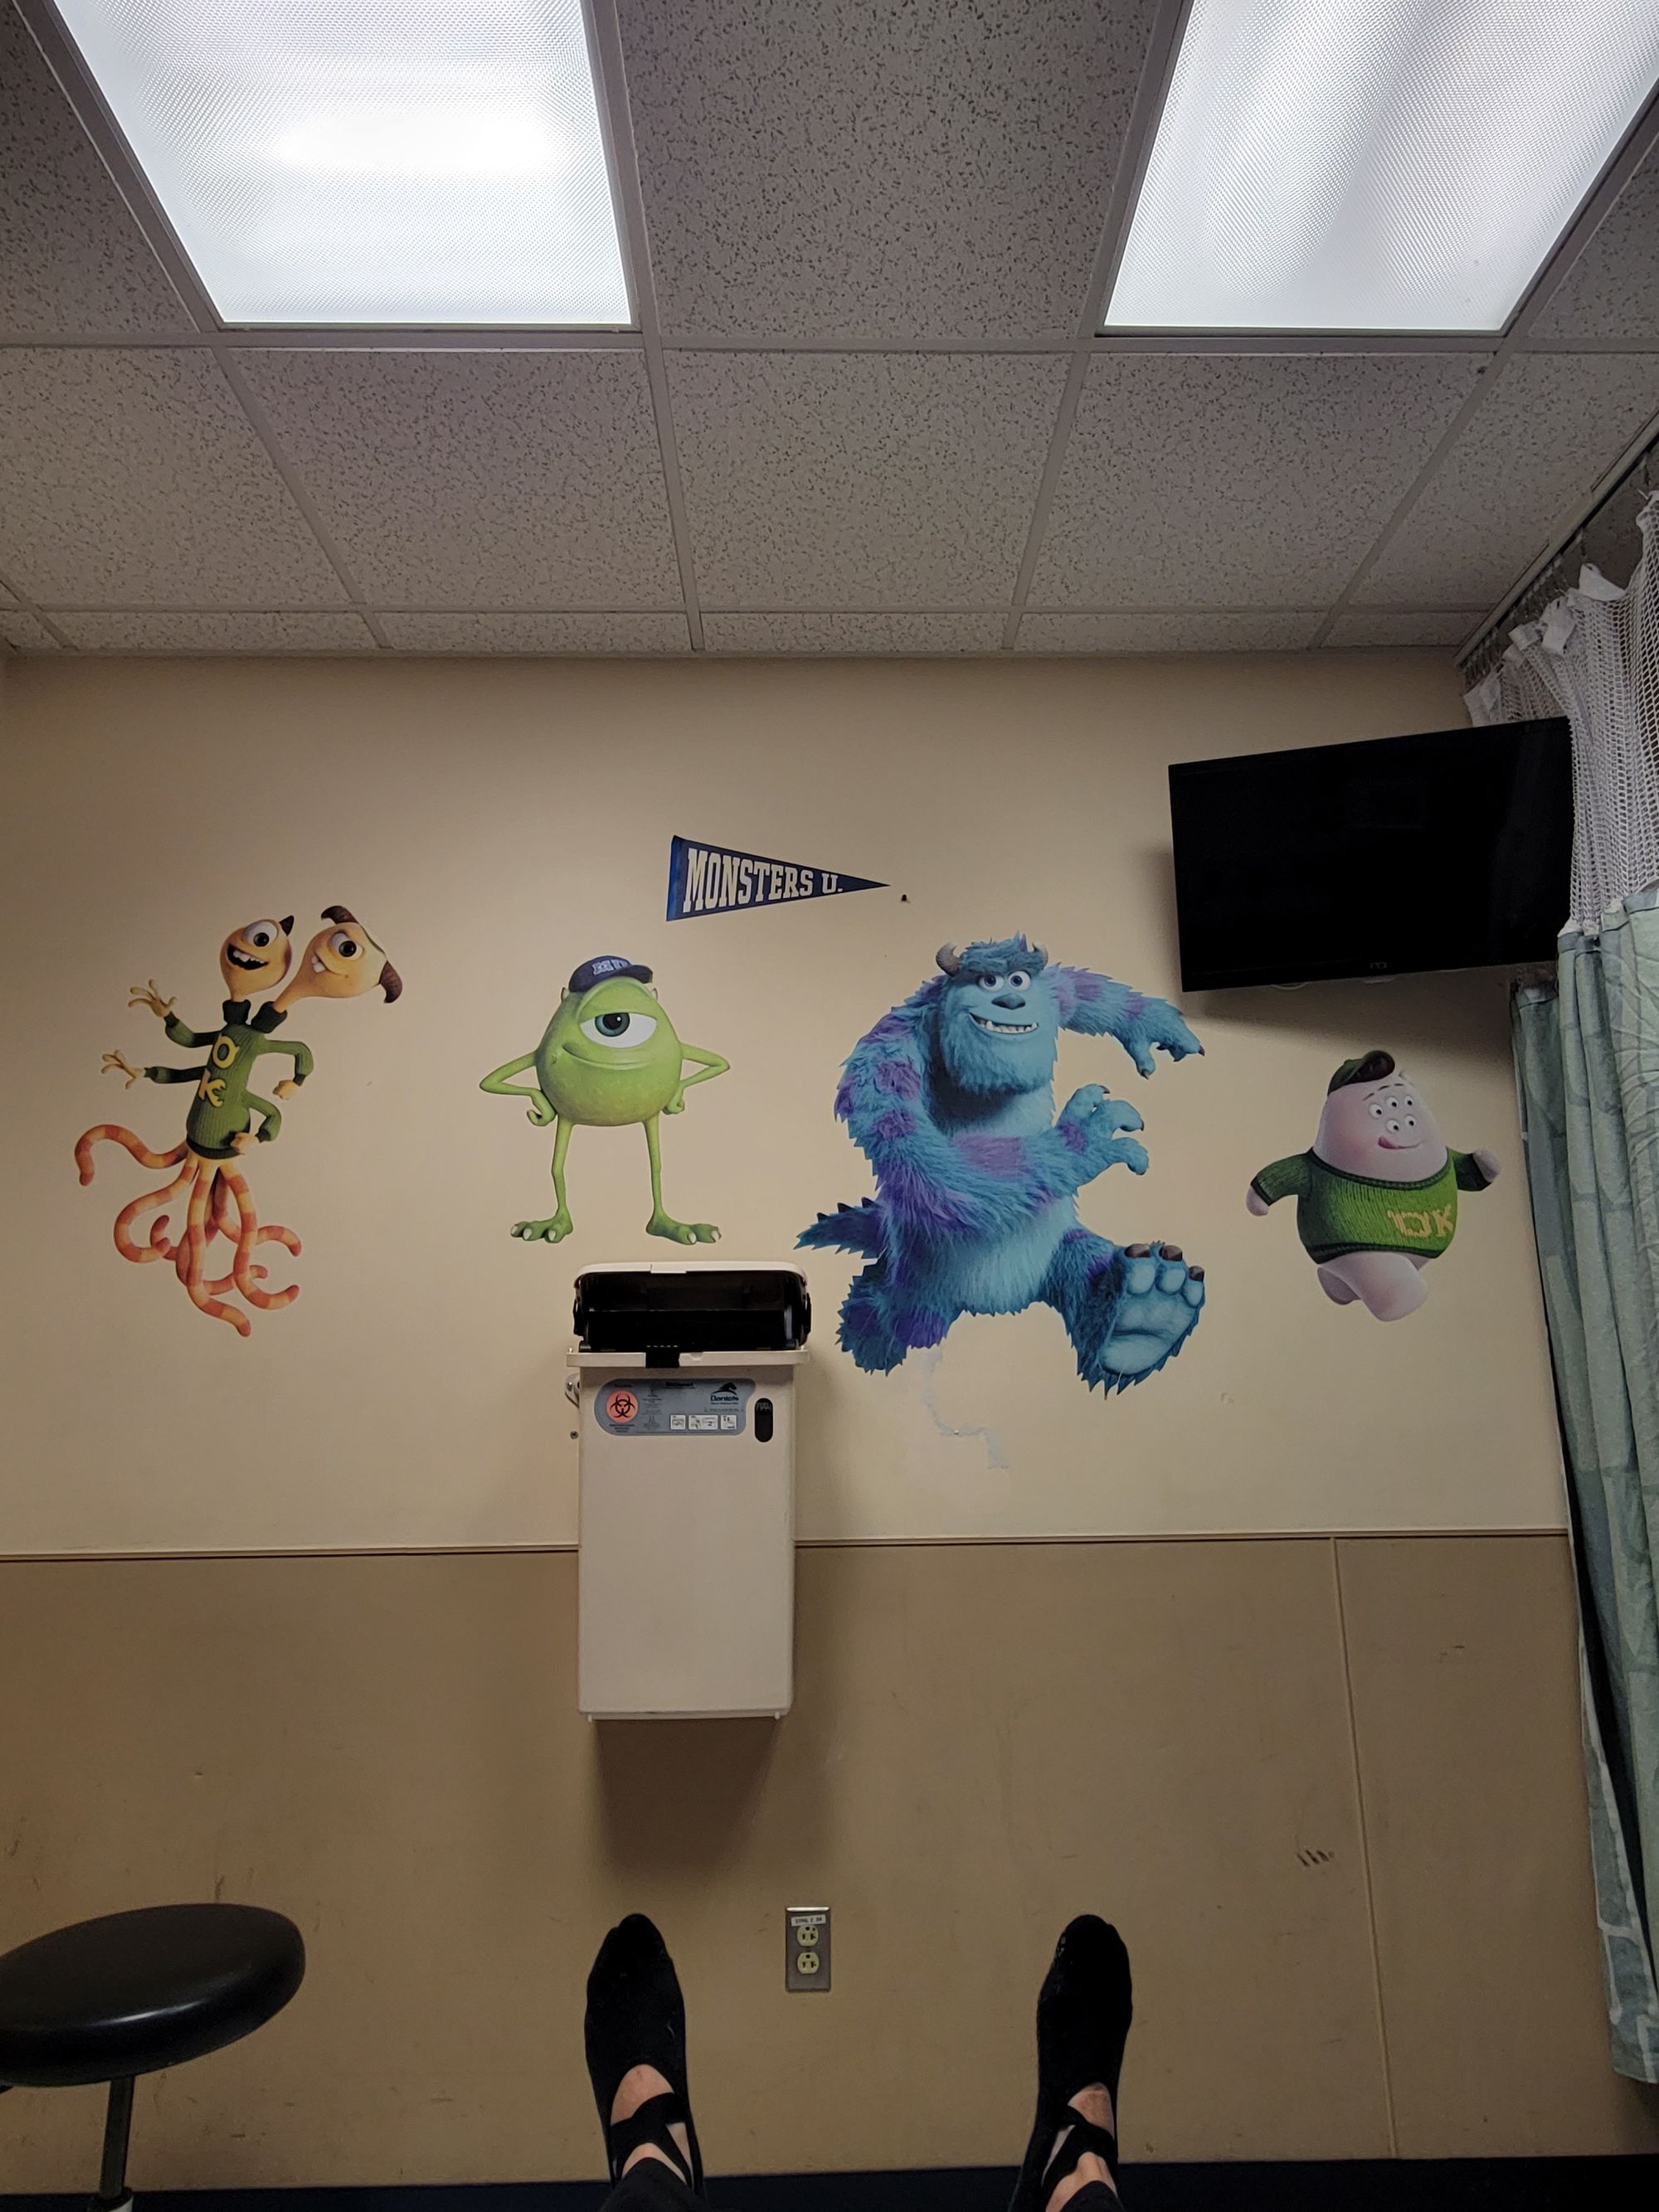 Monsters Inc characters in a hospital room with a TV and a Sharps Container